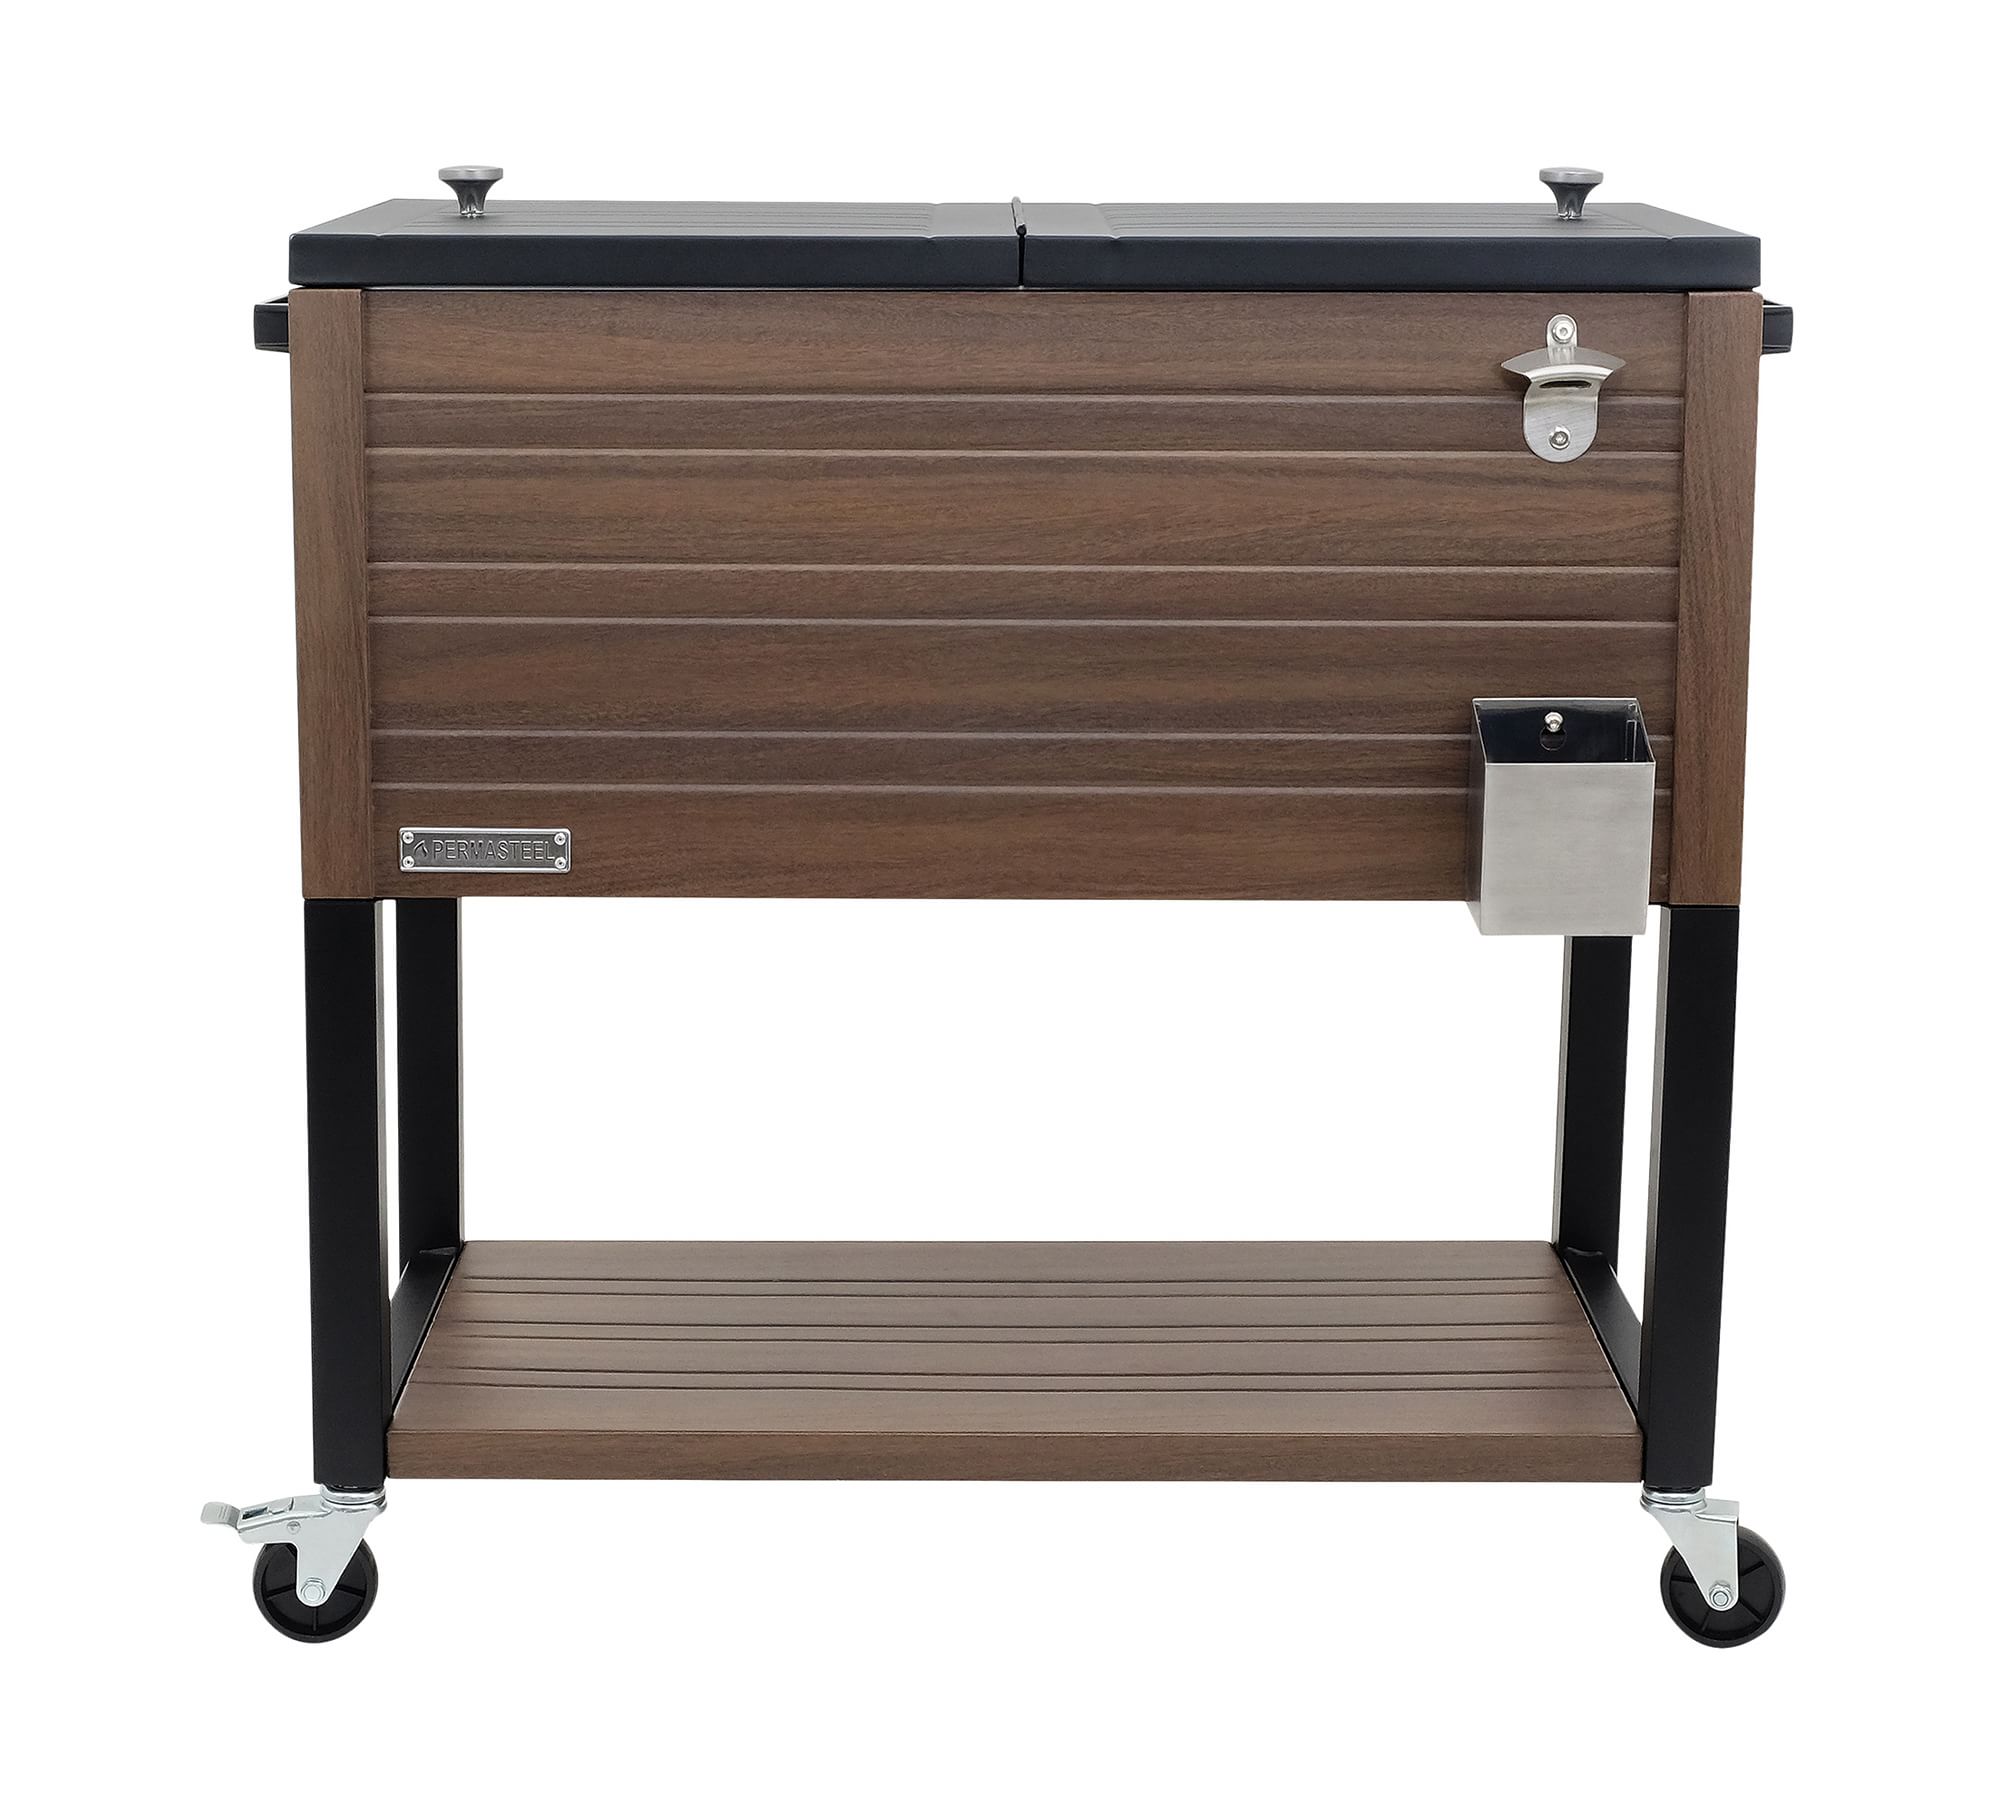 Wood Grain Stand-Up Cooler with Bottle Opener